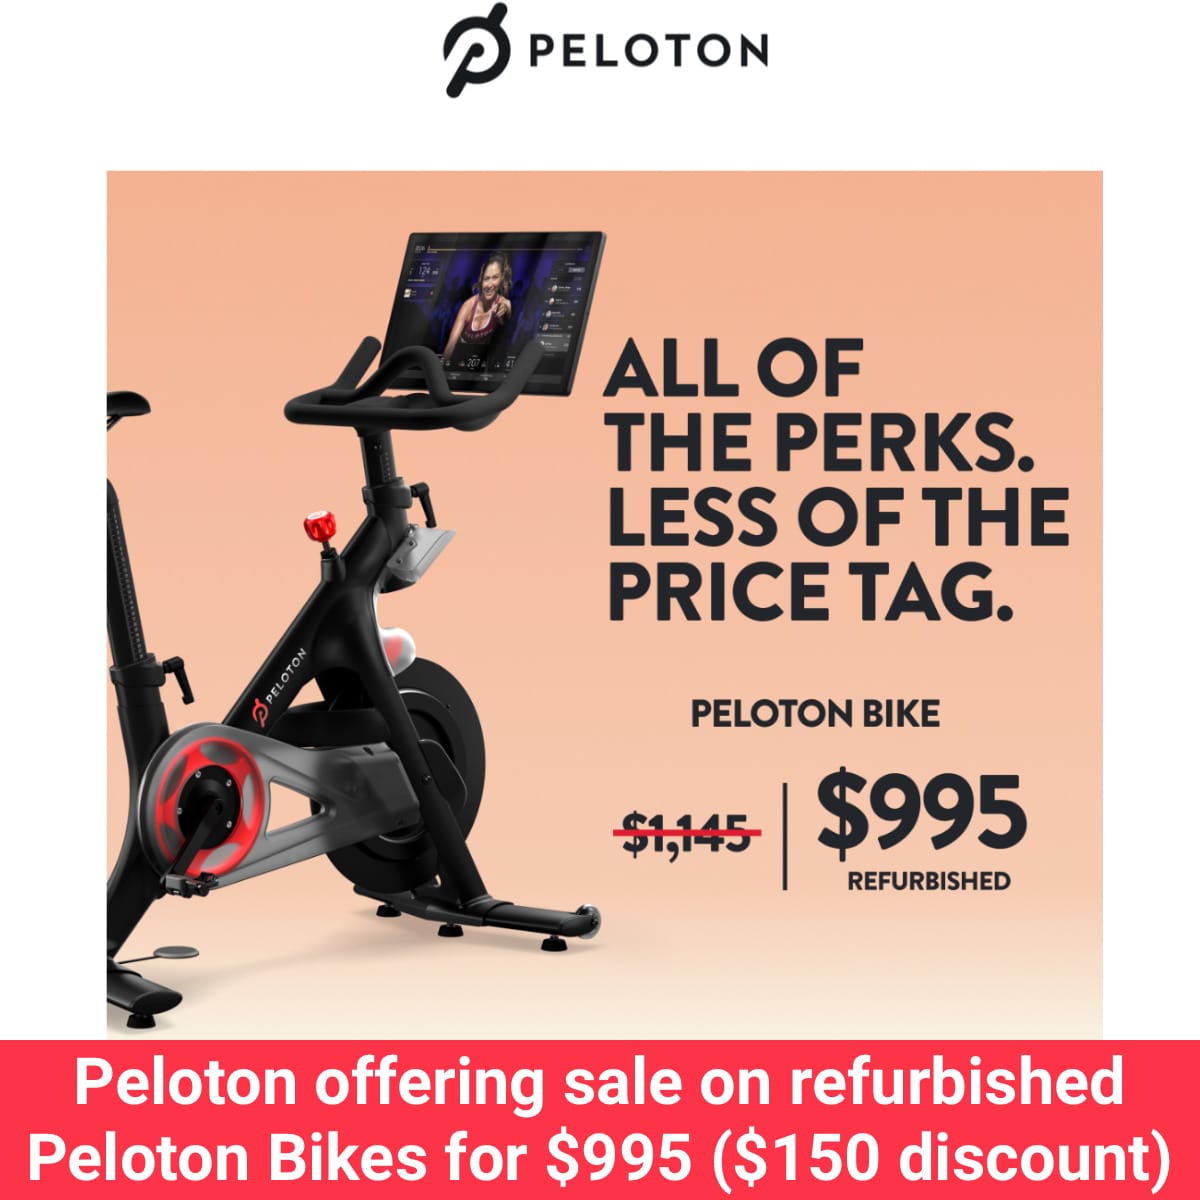 Peloton offering sale on refurbished Peloton Bikes for $995 in March 2023 - $150 discount